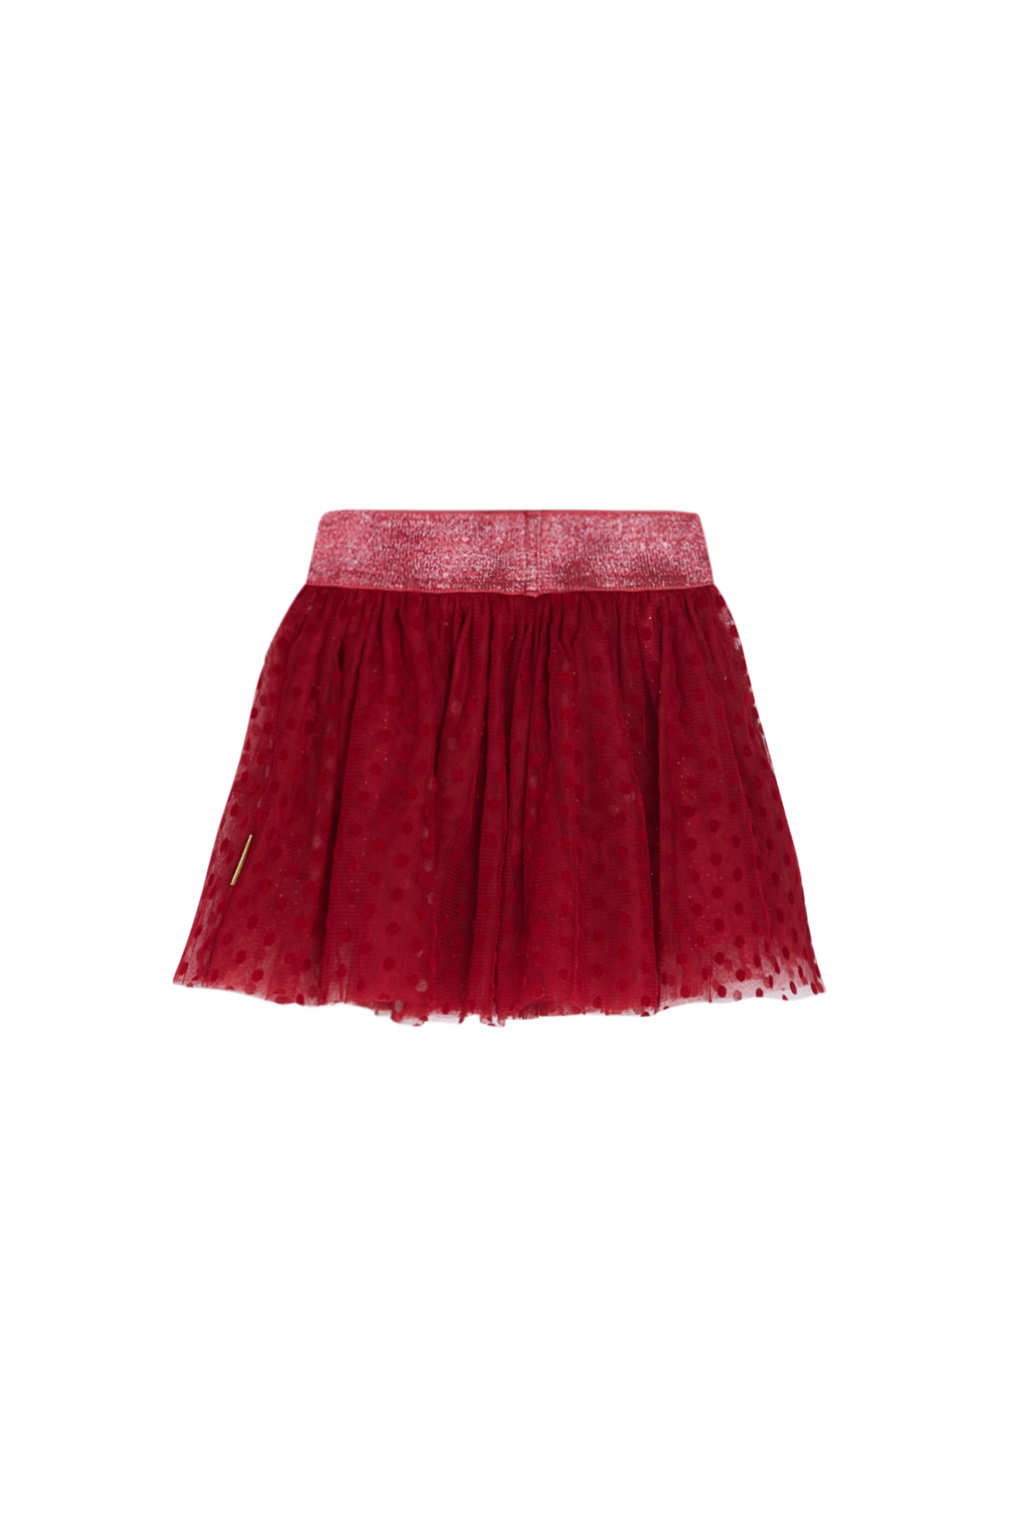 Hust and Claire Nissine Skirt Teaberry